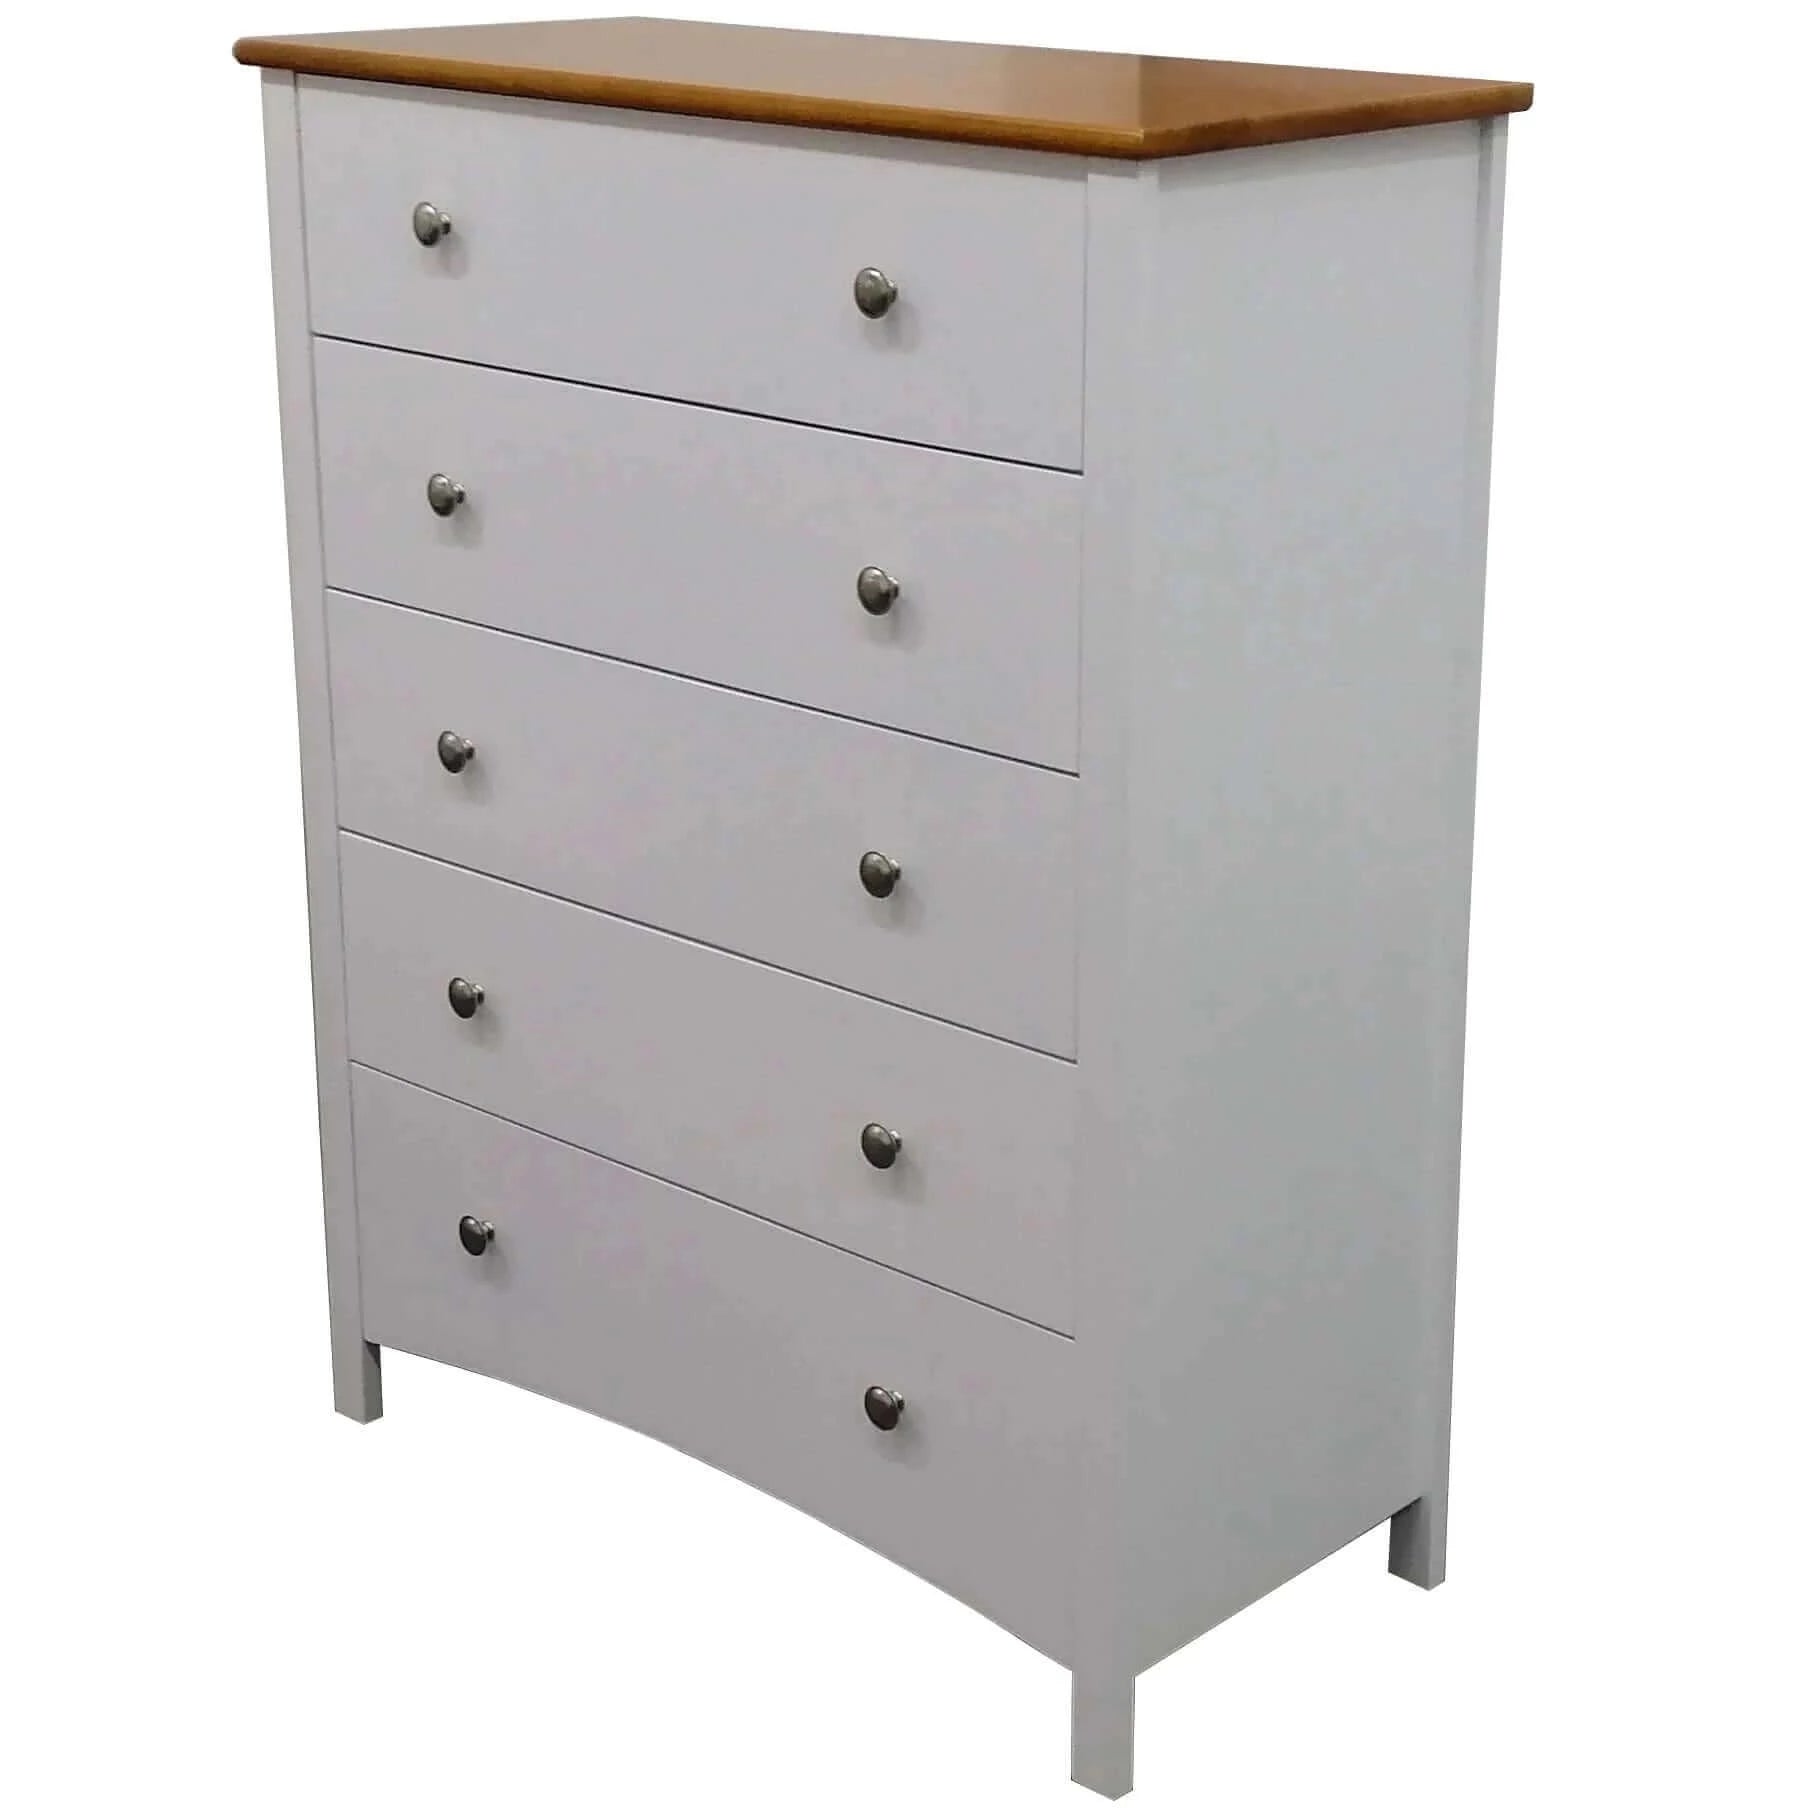 Lobelia Tallboy 5 Chest of Drawers Solid Rubber Wood Bed Storage Cabinet - White-Upinteriors